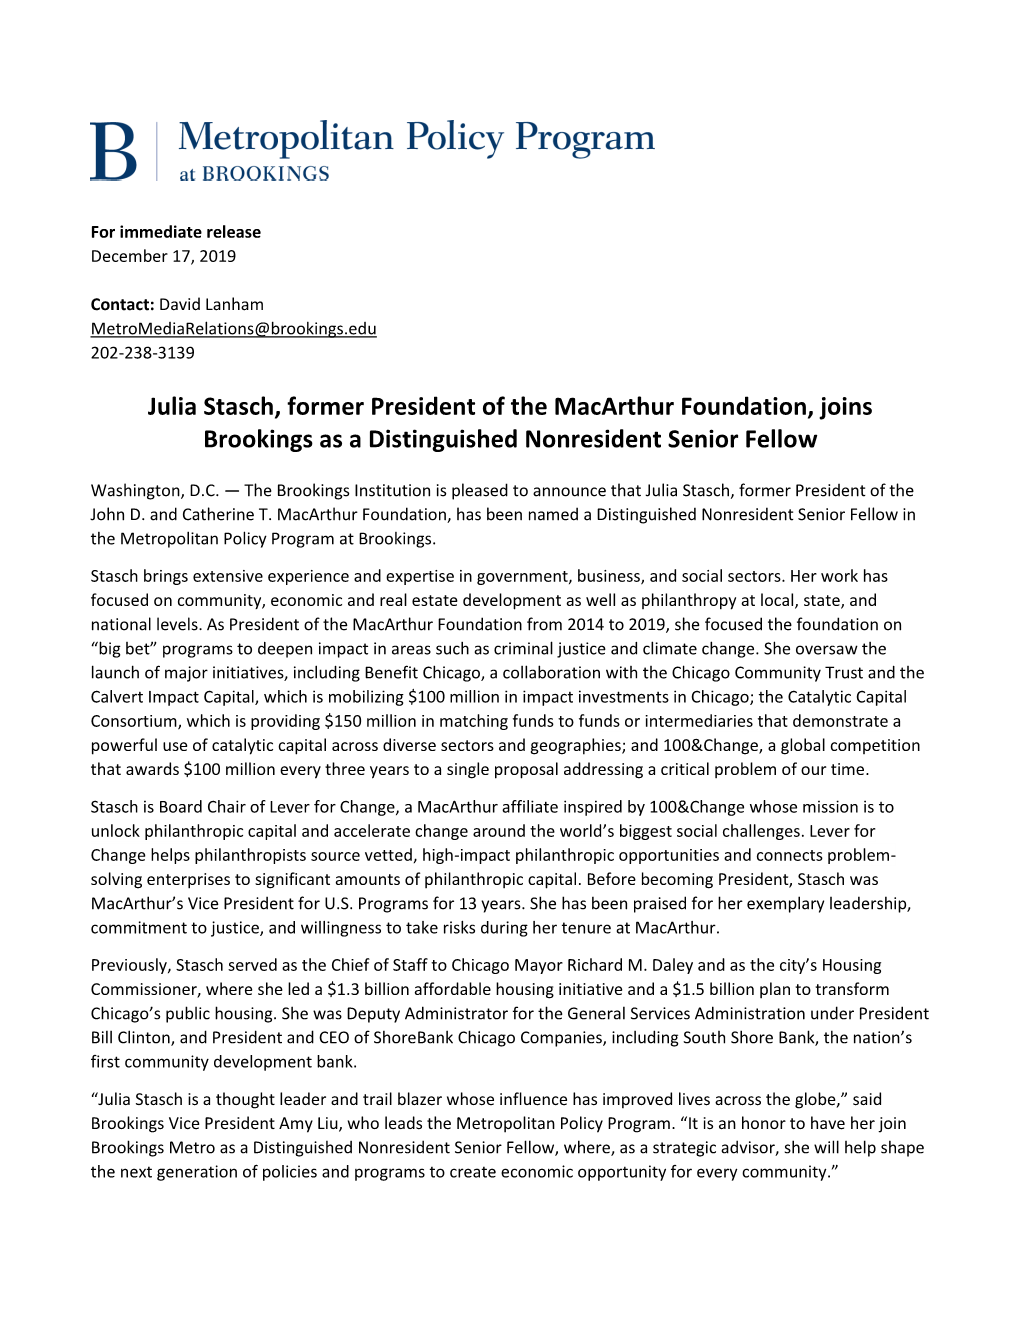 Julia Stasch, Former President of the Macarthur Foundation, Joins Brookings As a Distinguished Nonresident Senior Fellow